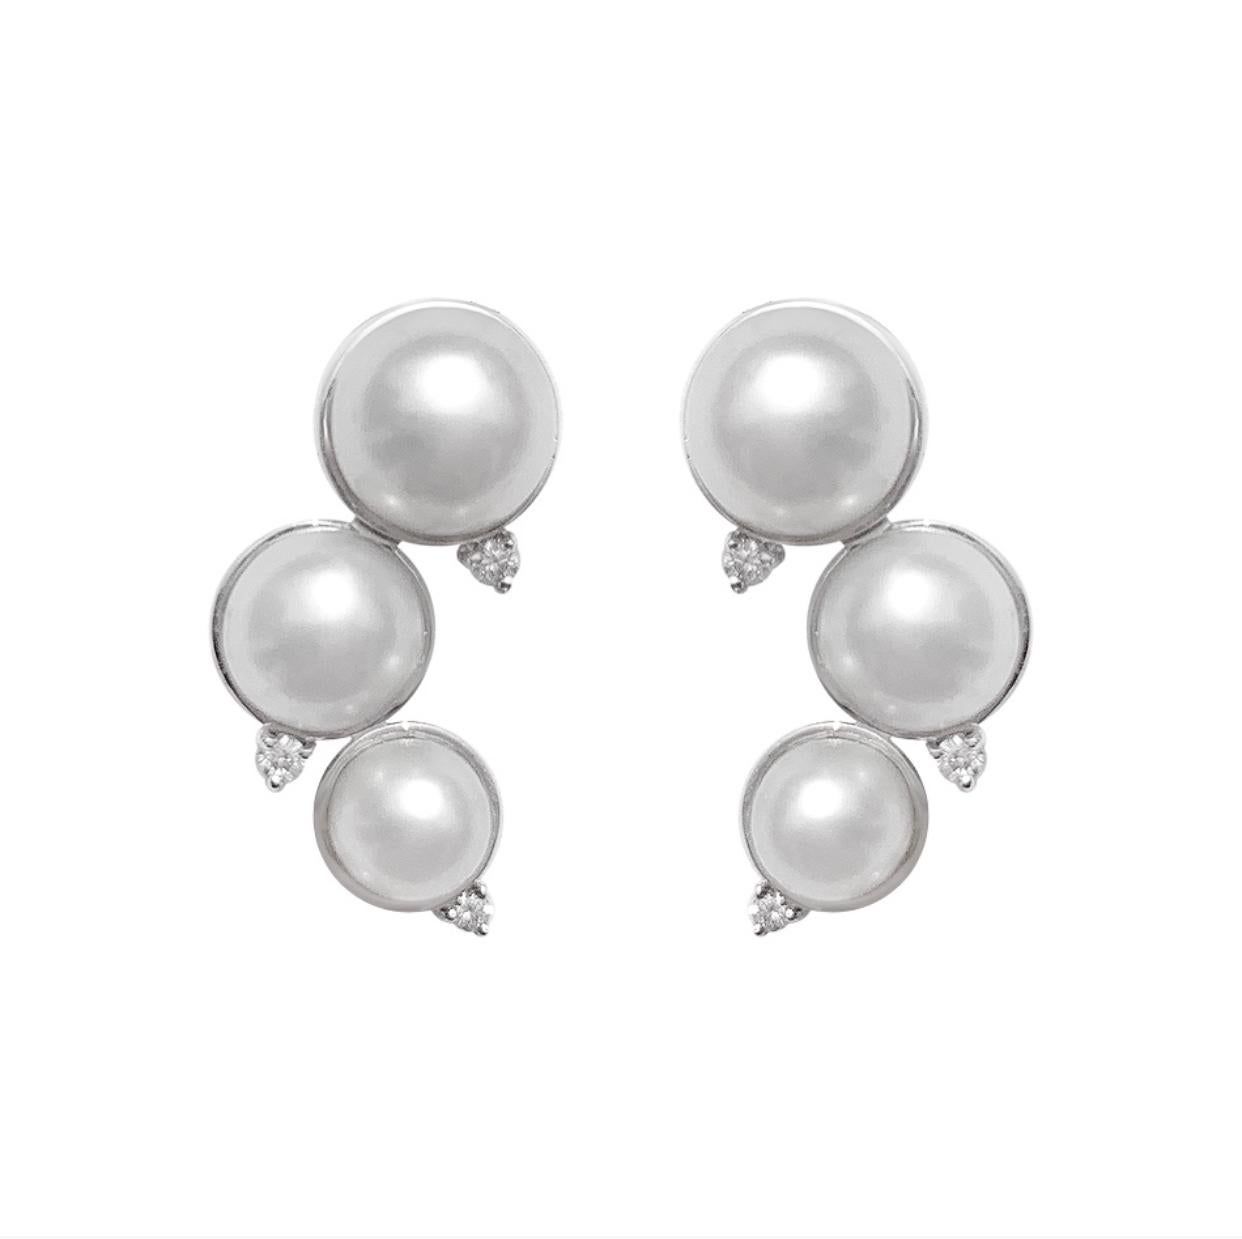 Necklace White Gold 18 K (Matching Earrings Available)

Diamond 5-RND-0,12-H/VS2A 
Pearls diameter 4-9,08ct
Pearls diameter 1-0,85ct
Weight 7.78 grams

With a heritage of ancient fine Swiss jewelry traditions, NATKINA is a Geneva based jewellery